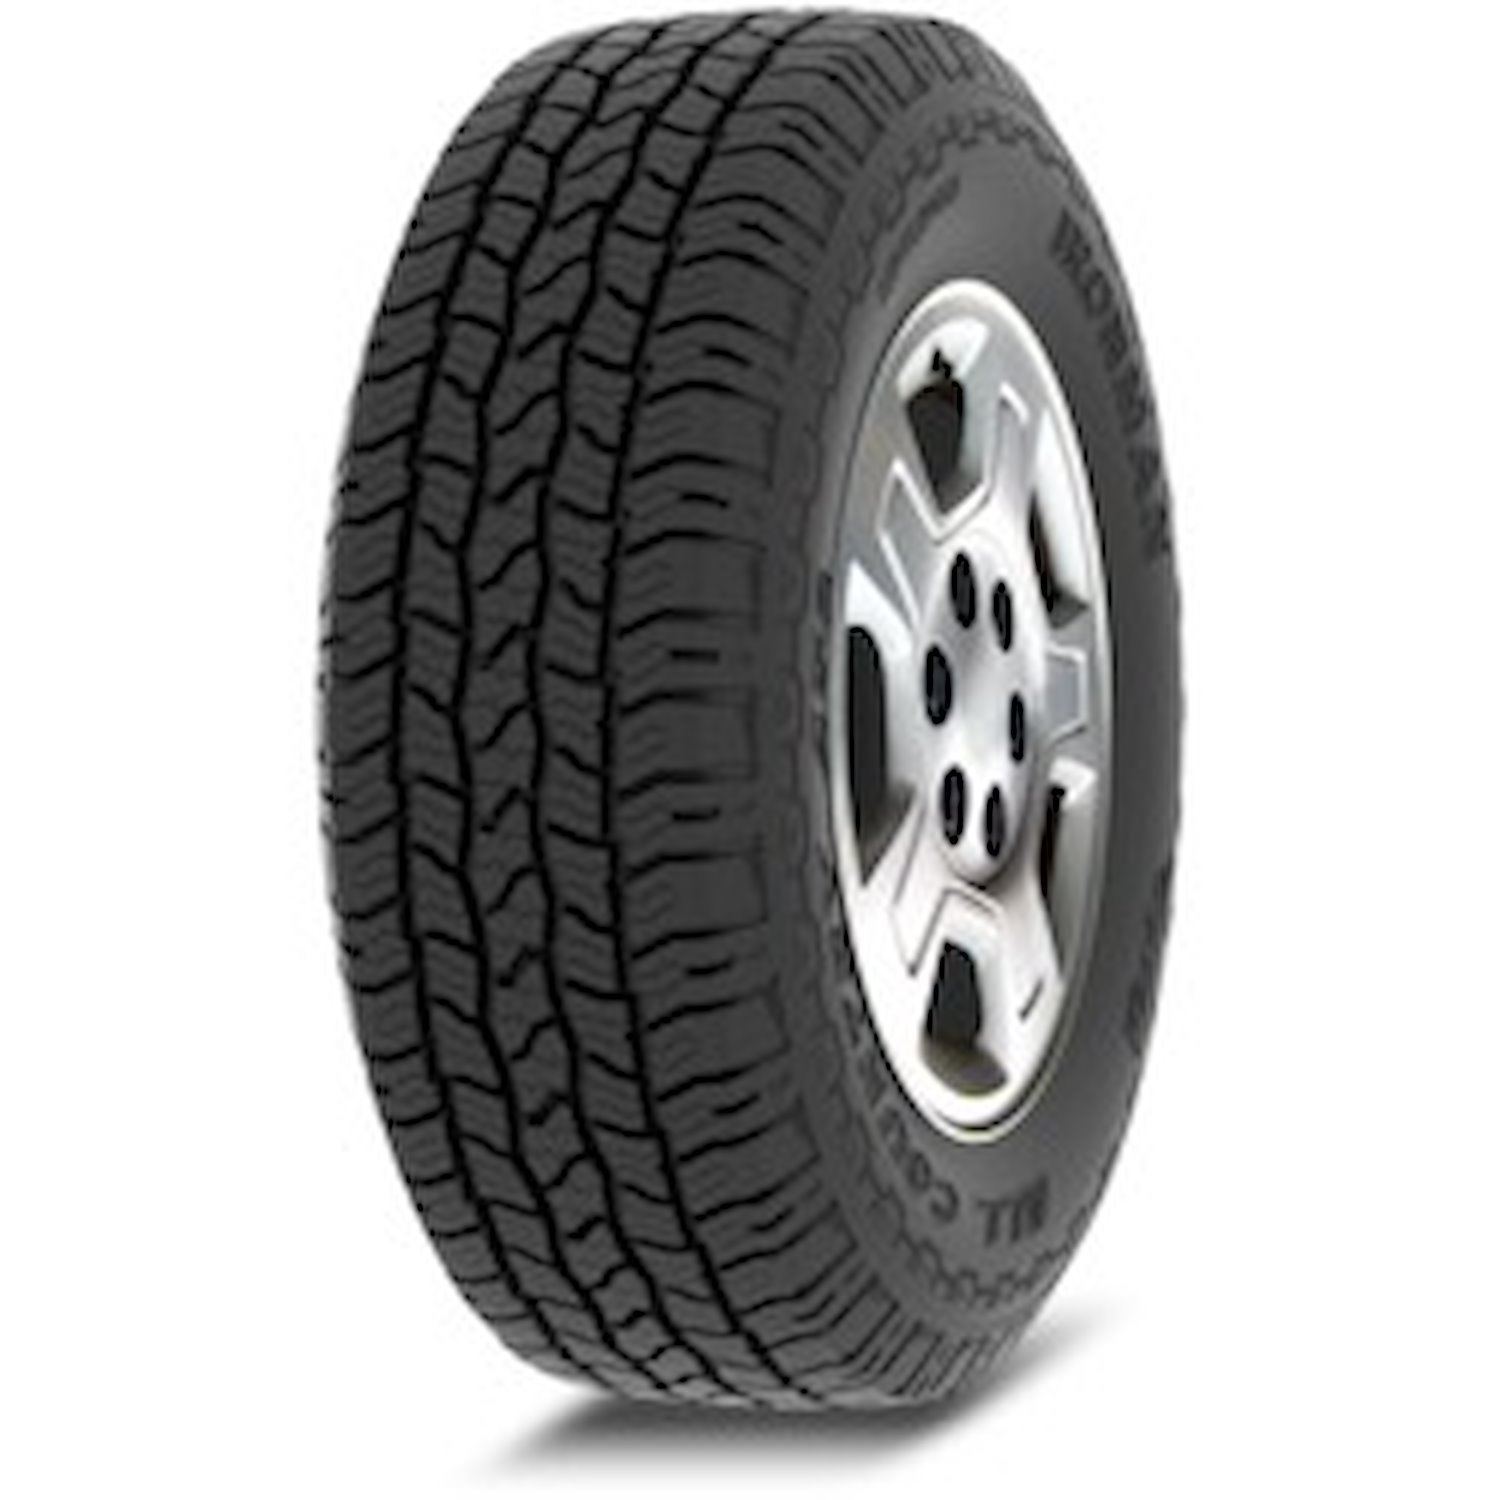 07584 All Country AT2 Tire, 235/70R16, 106T